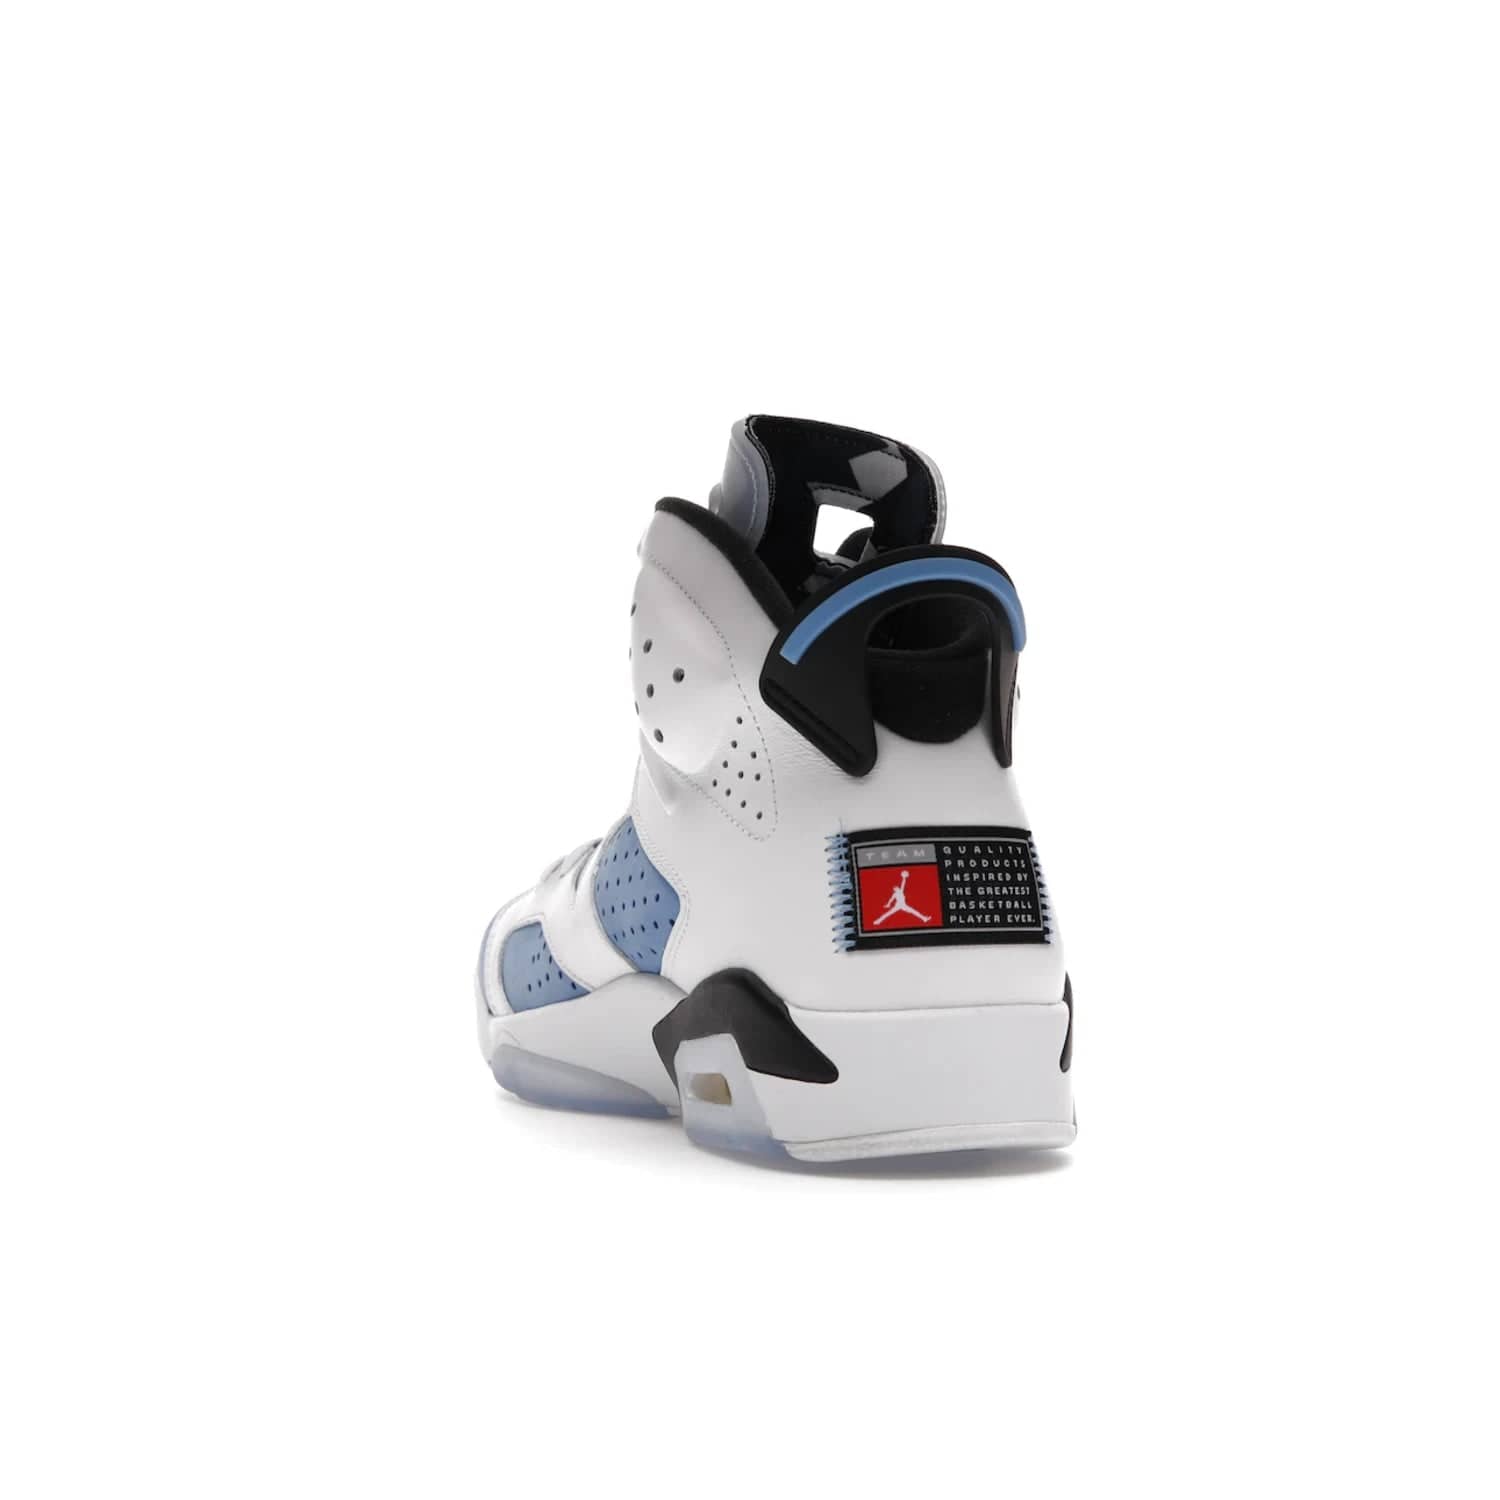 Jordan 6 Retro UNC White - Image 26 - Only at www.BallersClubKickz.com - Air Jordan 6 Retro UNC White with classic UNC colors brings nostalgia and style to a legendary silhouette. Celebrate MJ's alma mater with navy blue accents, icy semi-translucent sole and Jordan Team patch. Out March 2022 for the Sneaker Enthusiast.